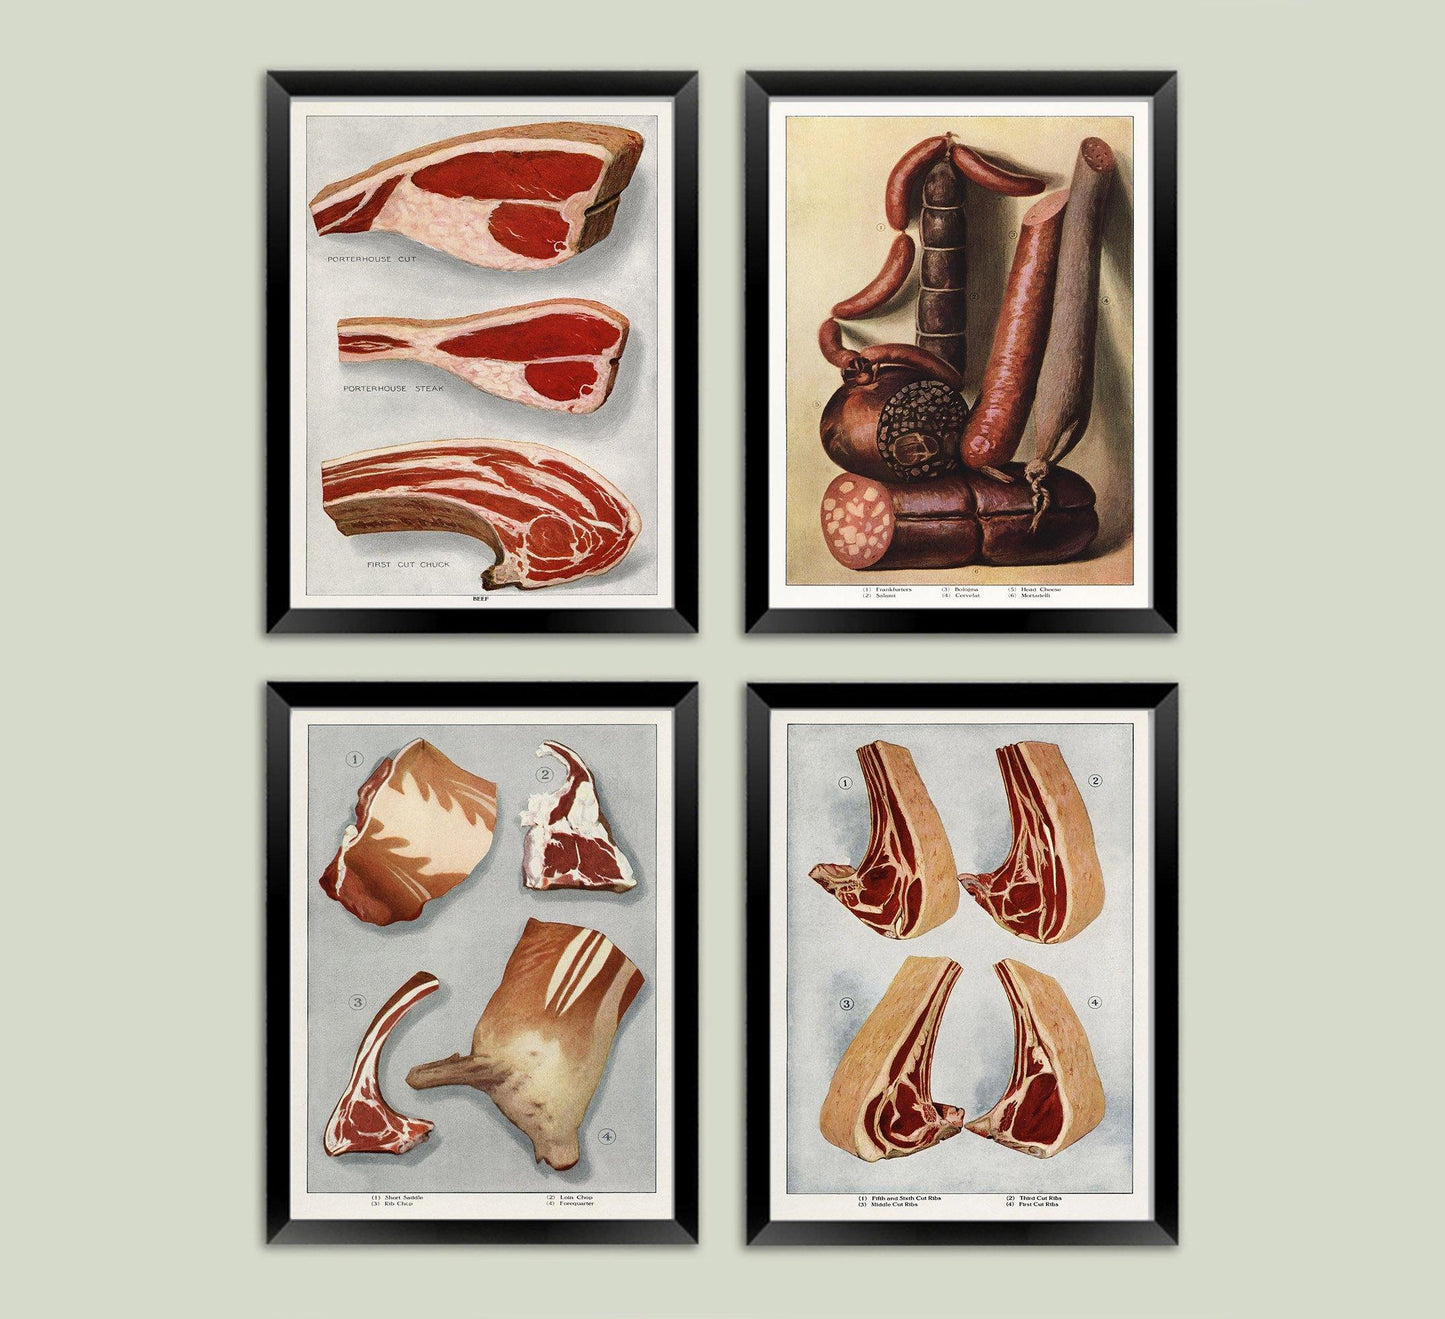 BUTCHER POSTERS: Grocer's Encylopedia Sausage and Steaks Meat Art Prints - Pimlico Prints